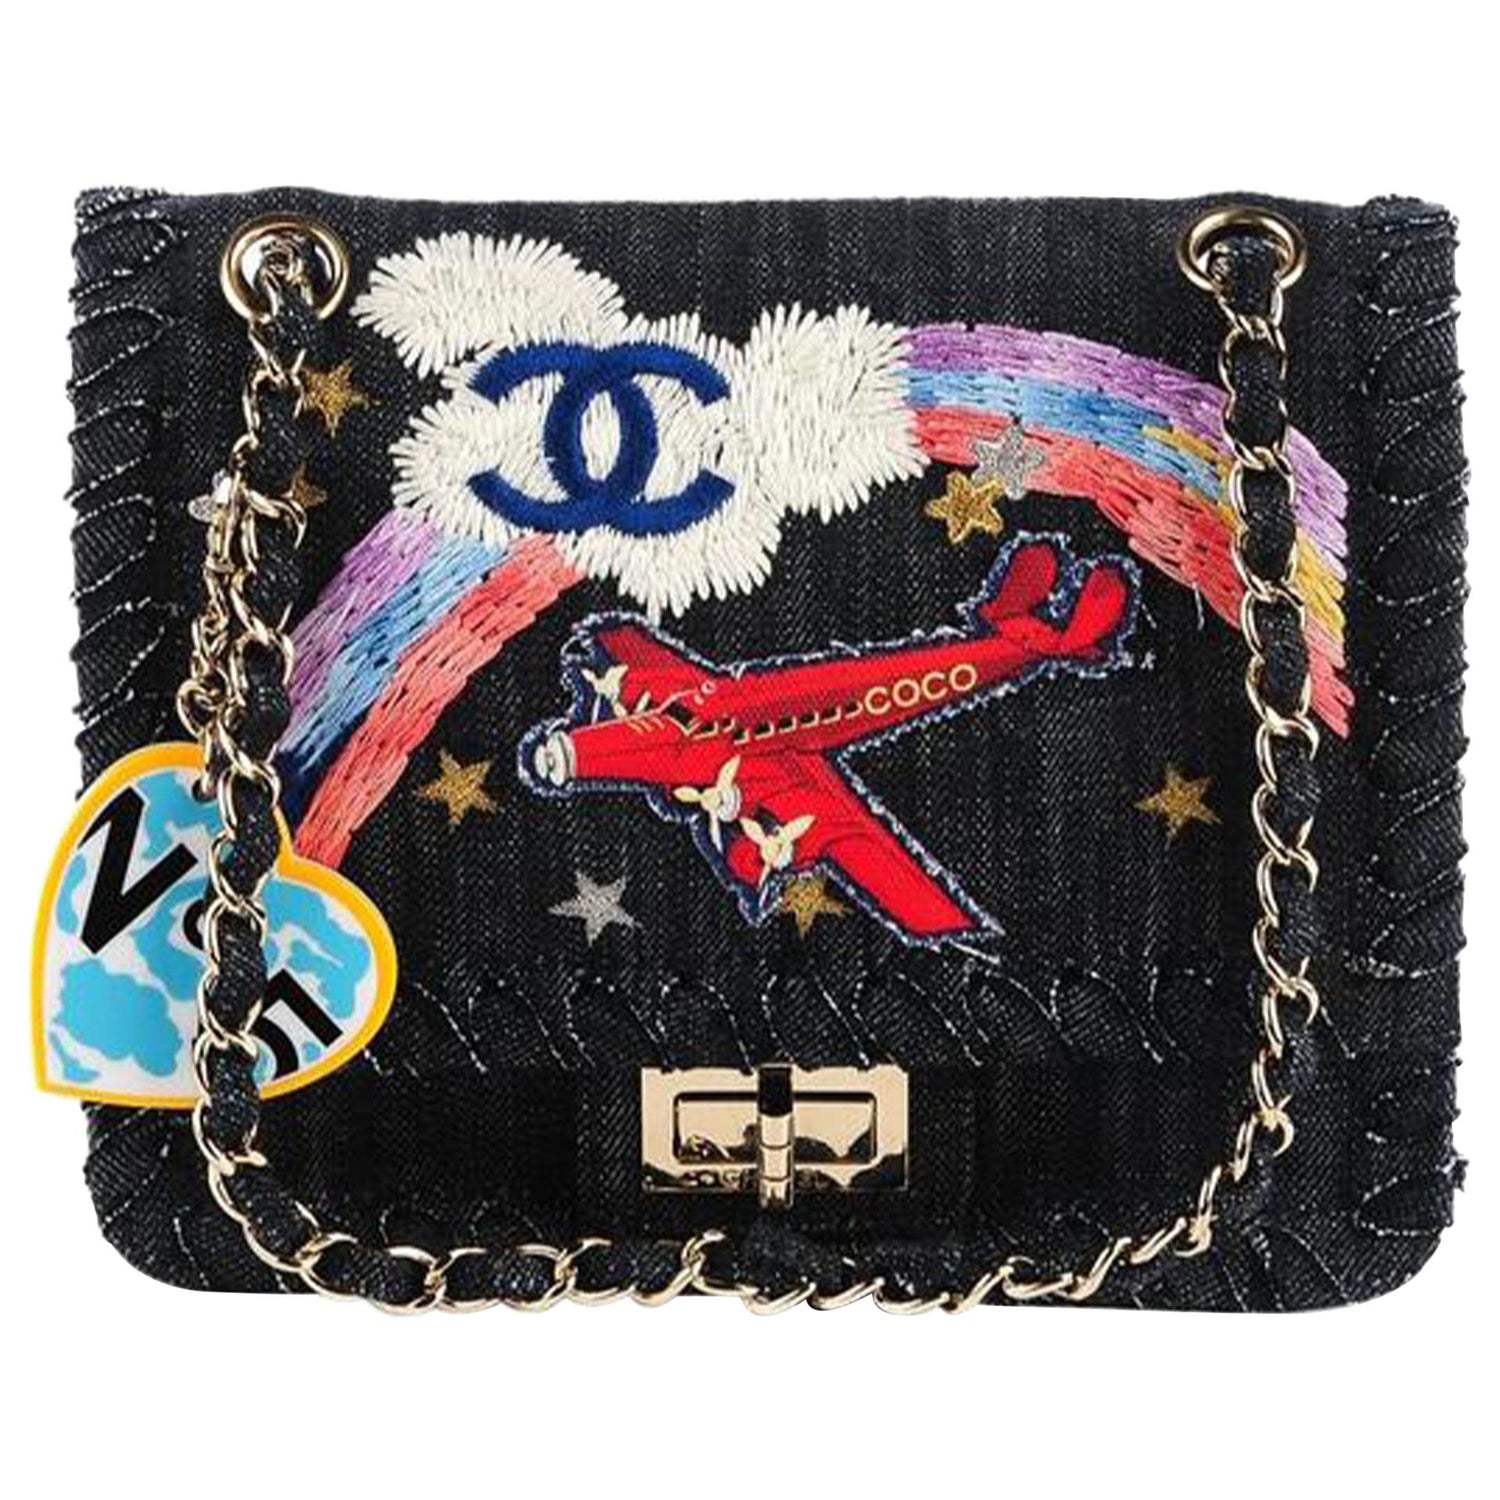 A RUNWAY PROTOTYPE of a CHANEL Jumbo denim bag with CHANEL Icons 2007-2008A